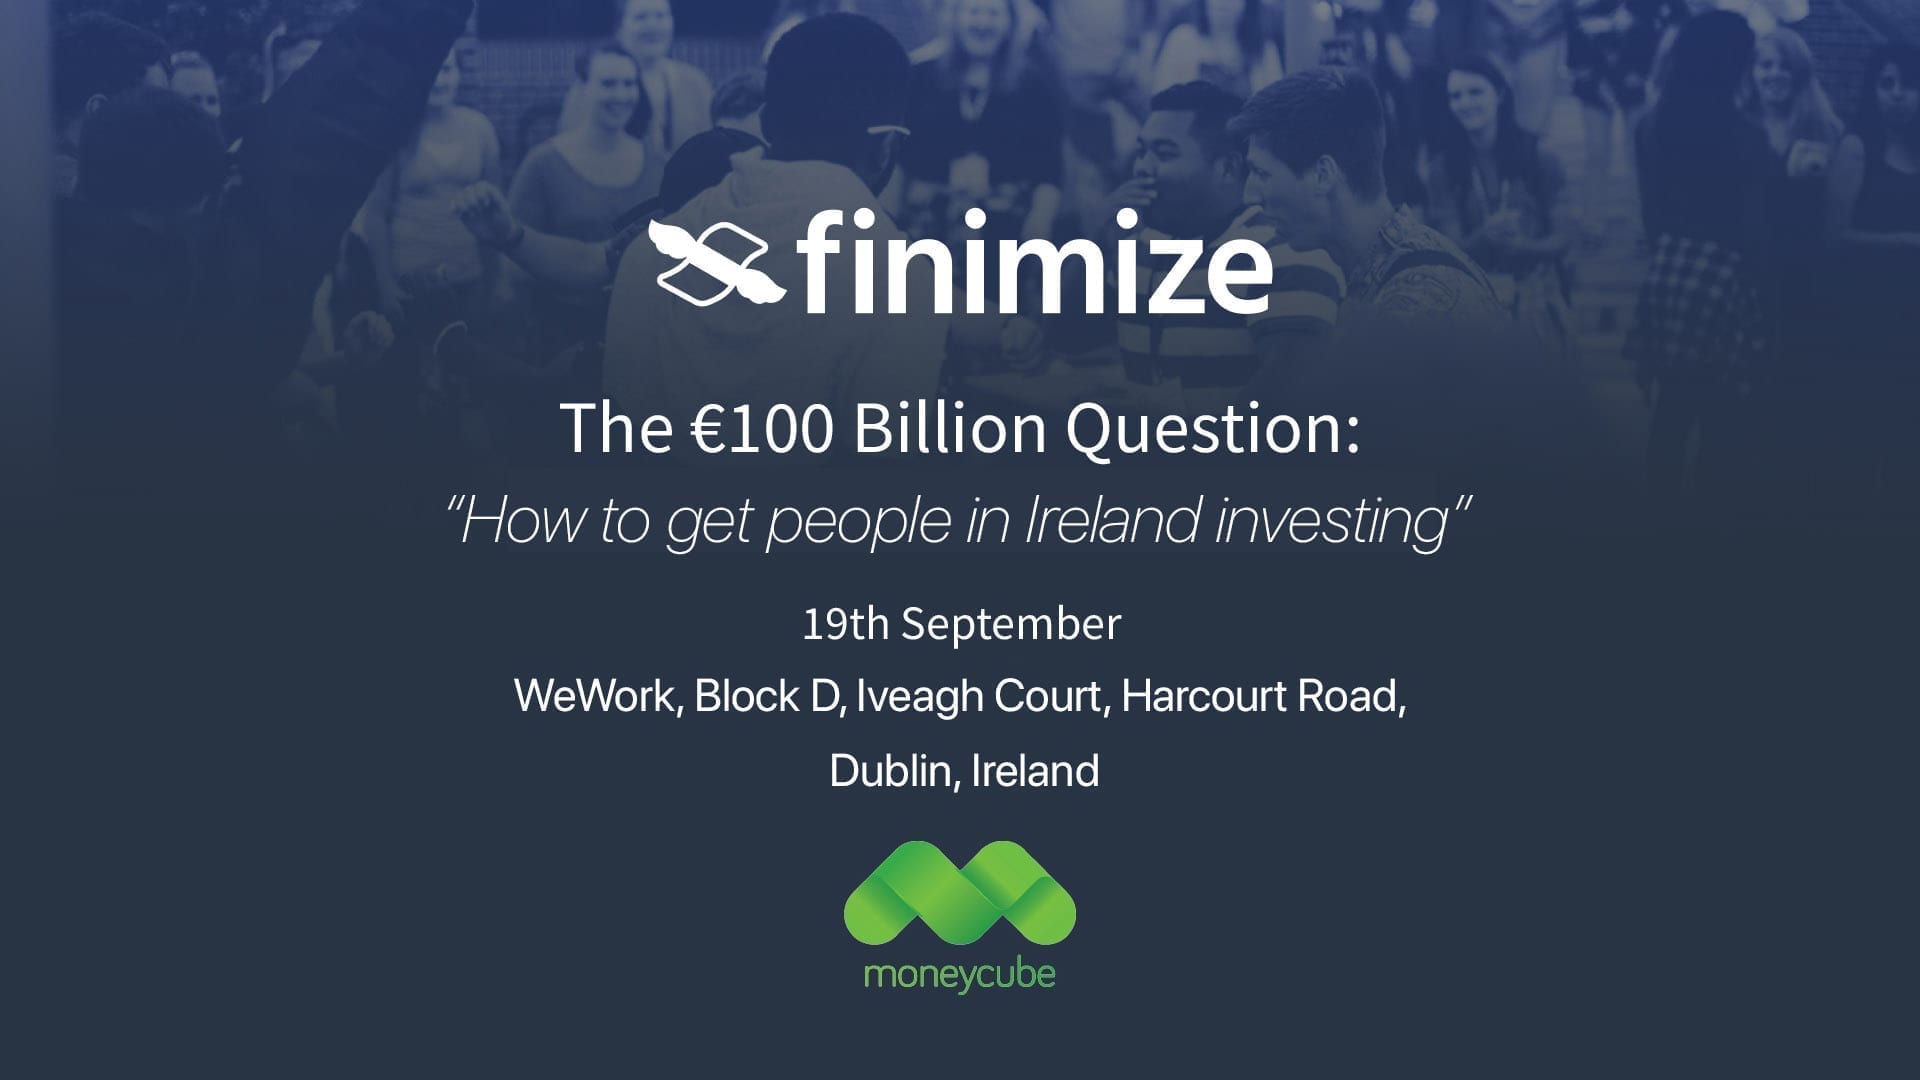 Finimize Moneycube - How To Get People In Ireland Investing